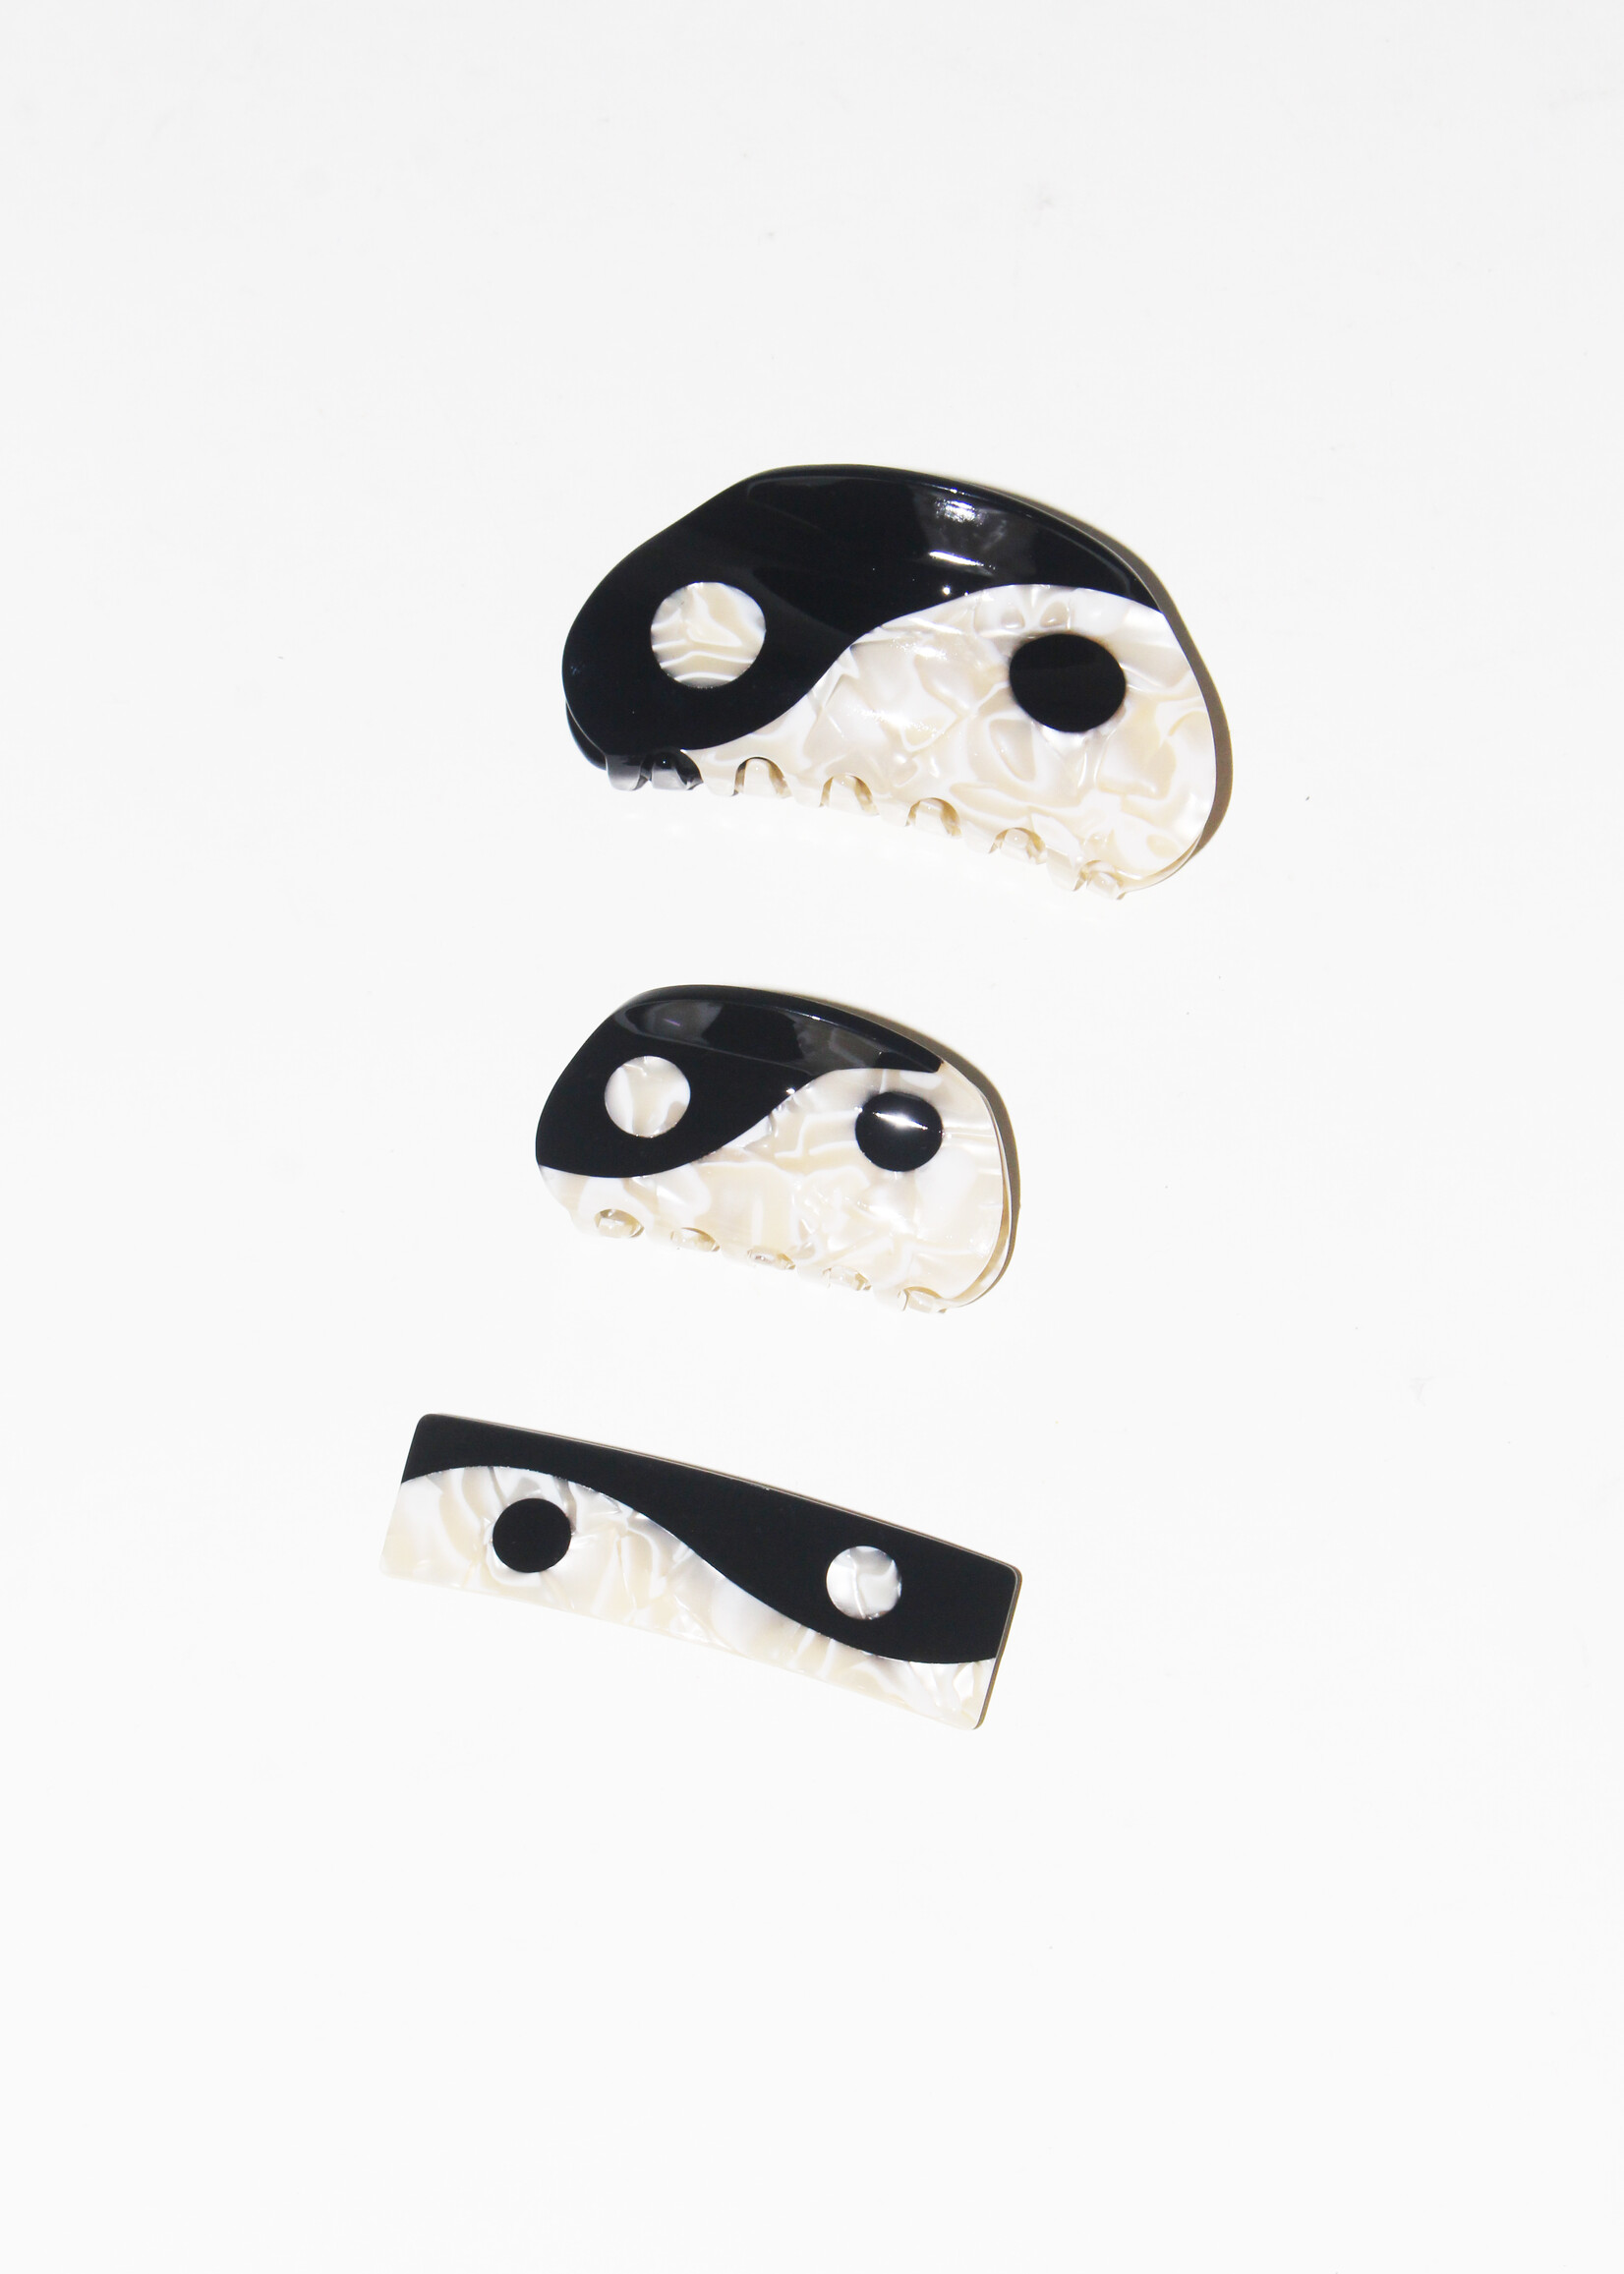 Black Yin and Yang Hair Claws and Barrettes